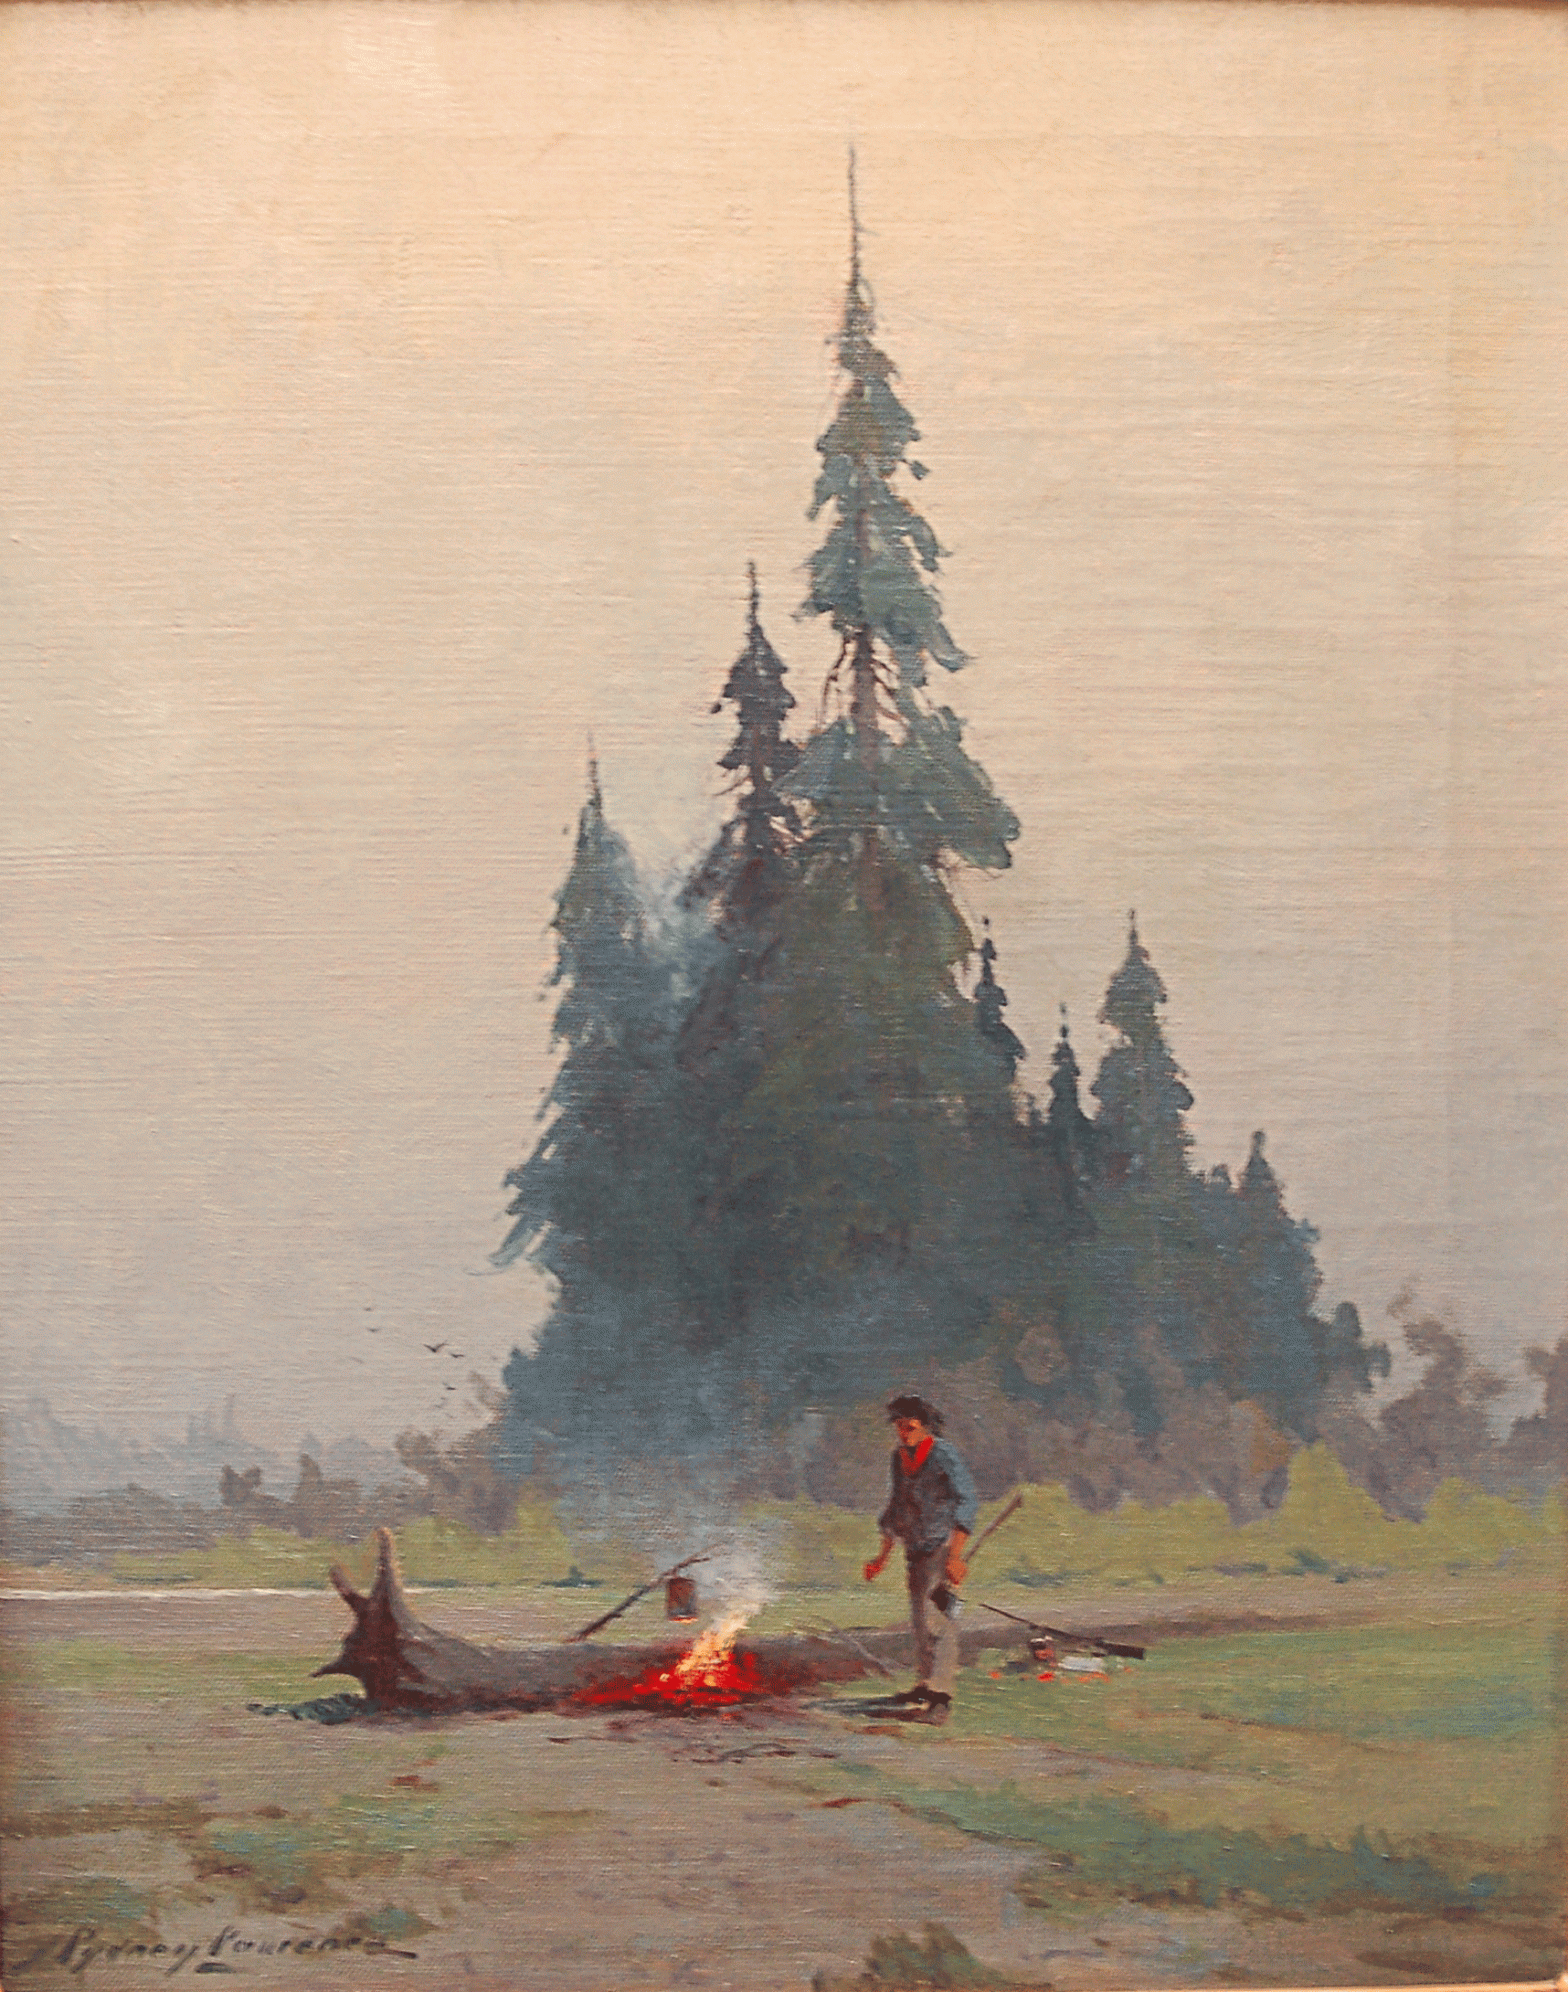 A painting of a man standing near a campfire in Alaska